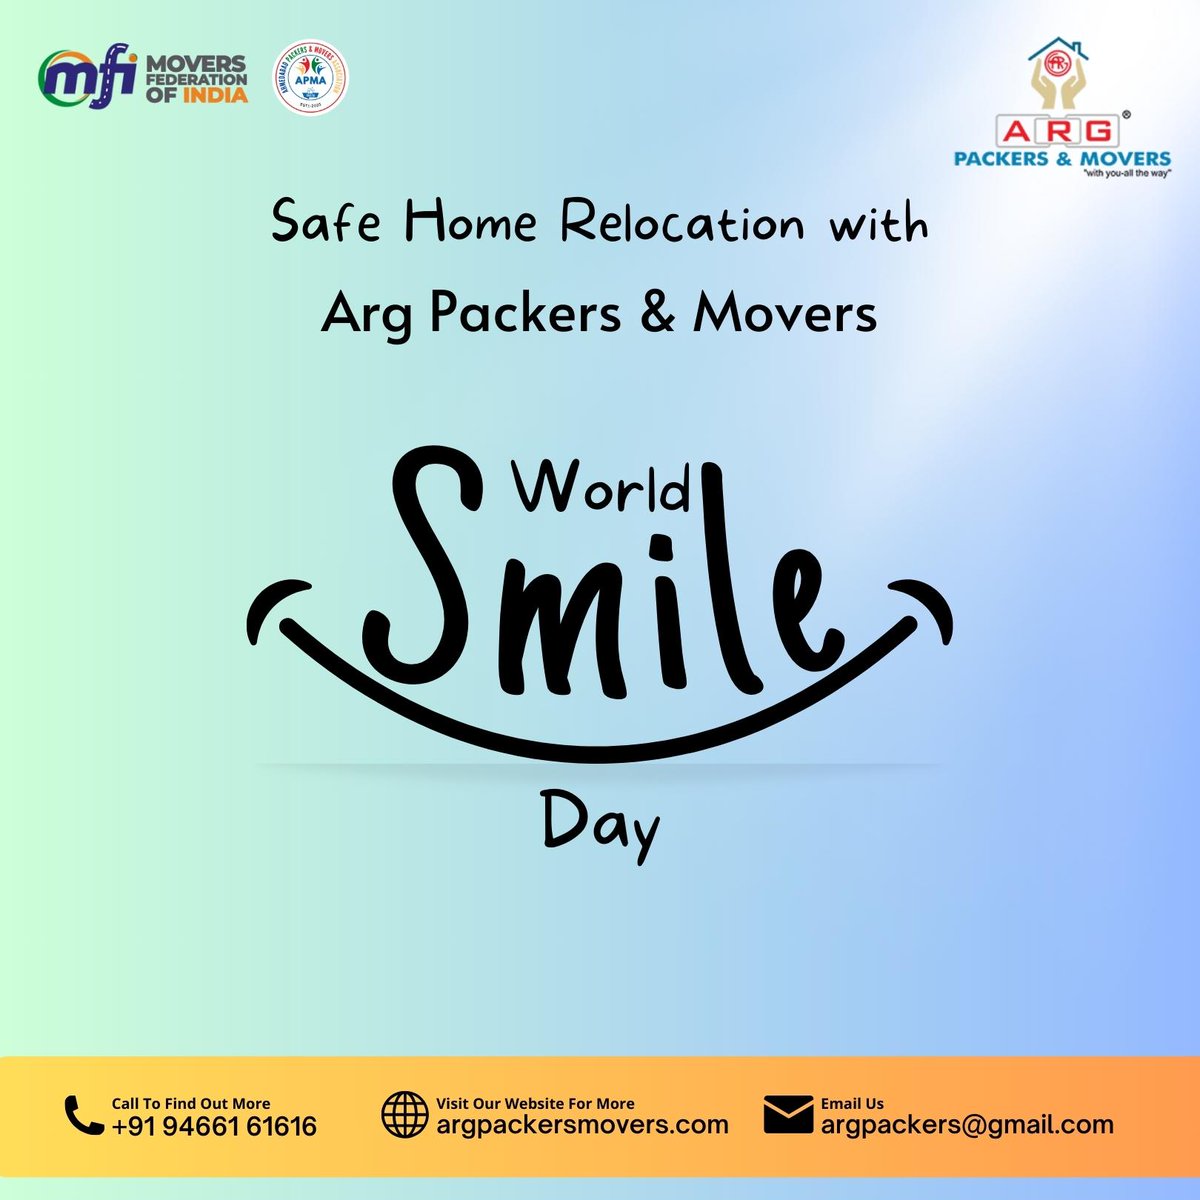 Make your move a happy one with Arg Packers and Movers on World Smile Day! Trust us for safe, stress-free home relocation and keep smiling. 😊

#WorldSmileDay #MoveWithAssurance #VehicleRelocation #ARGPackers #SafeMoving